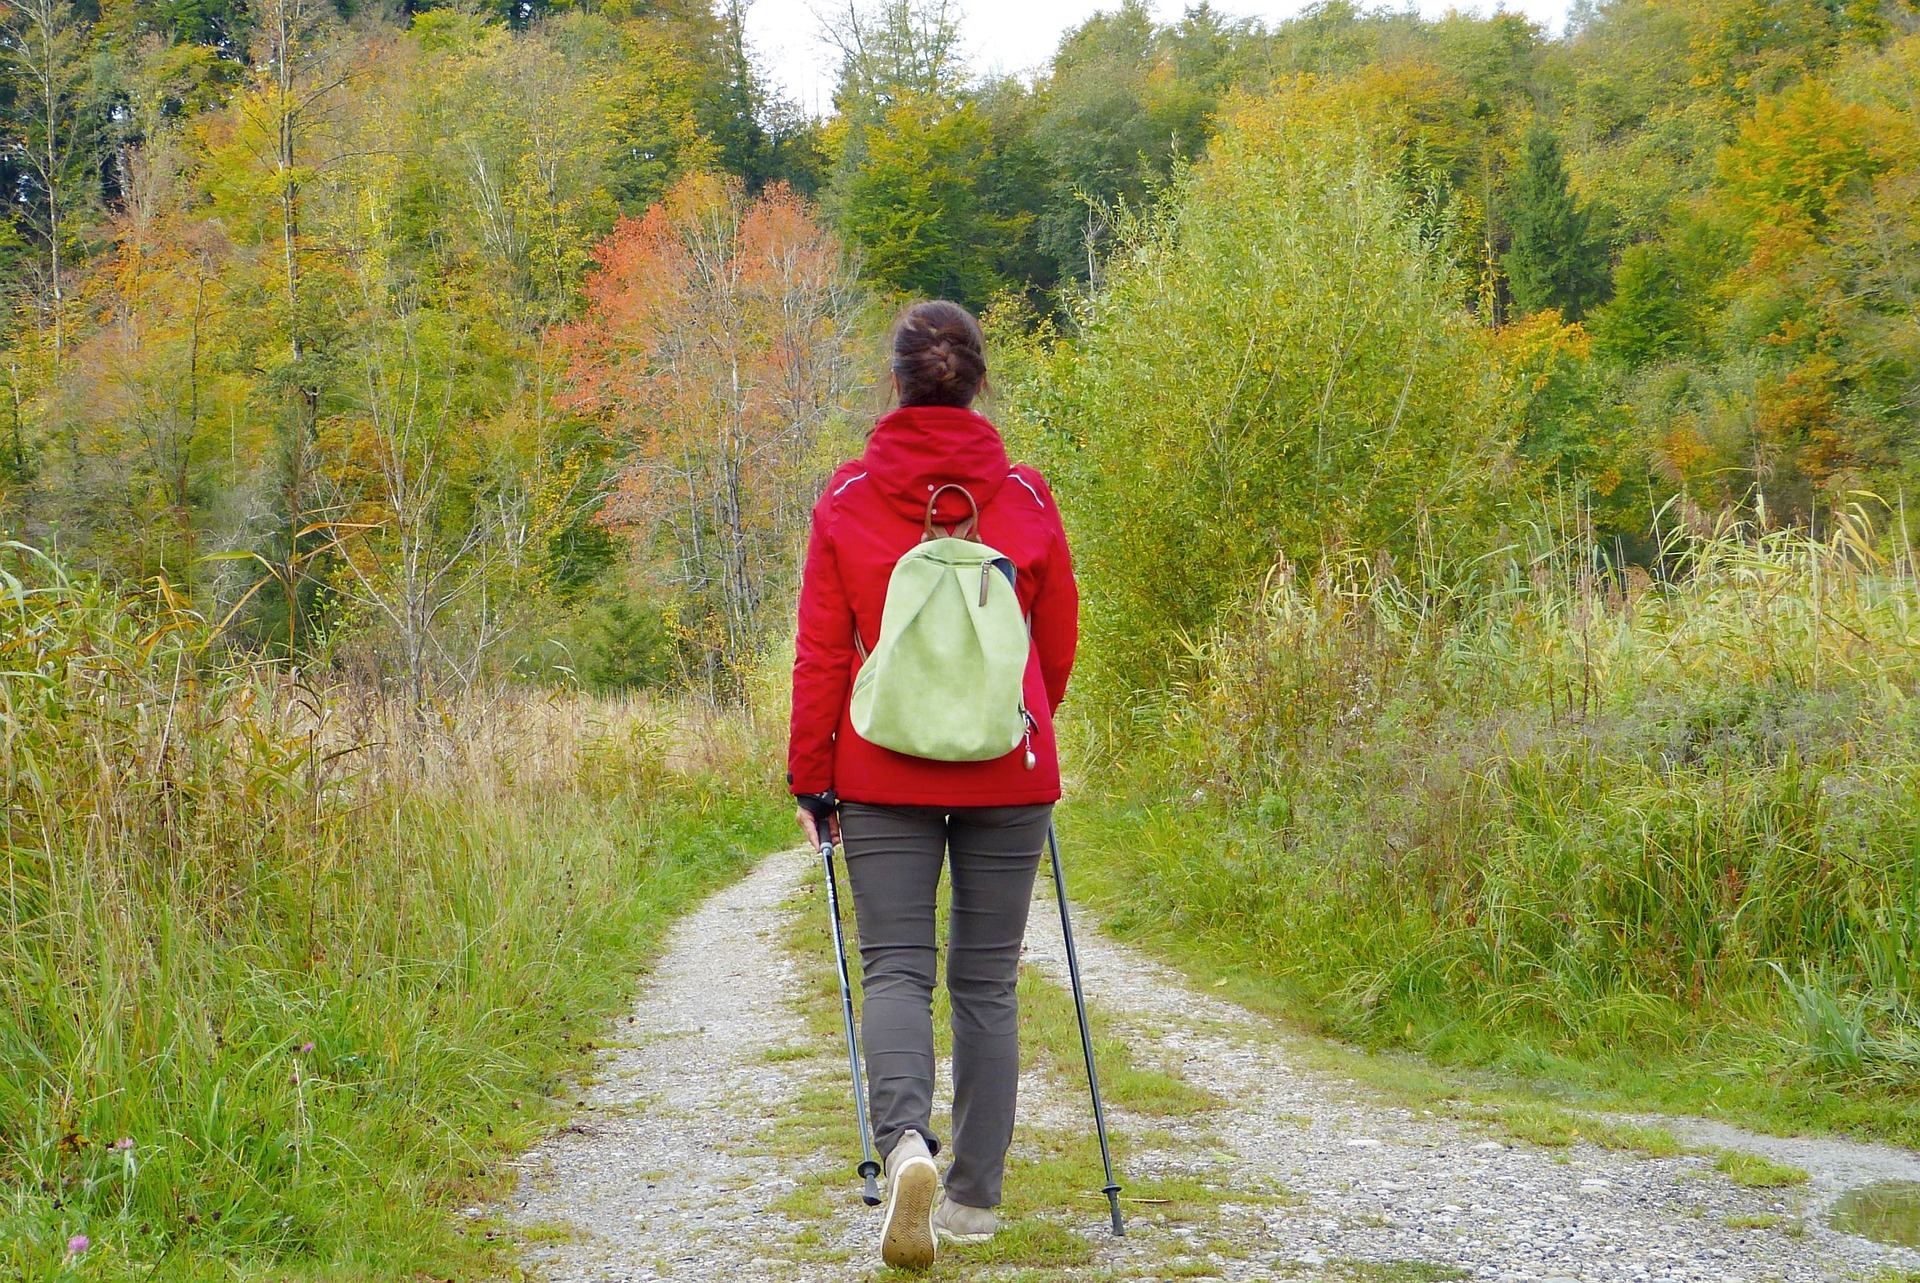 Independent living for adults with mental illness is obtainable with skills, as this woman has with her hiking.